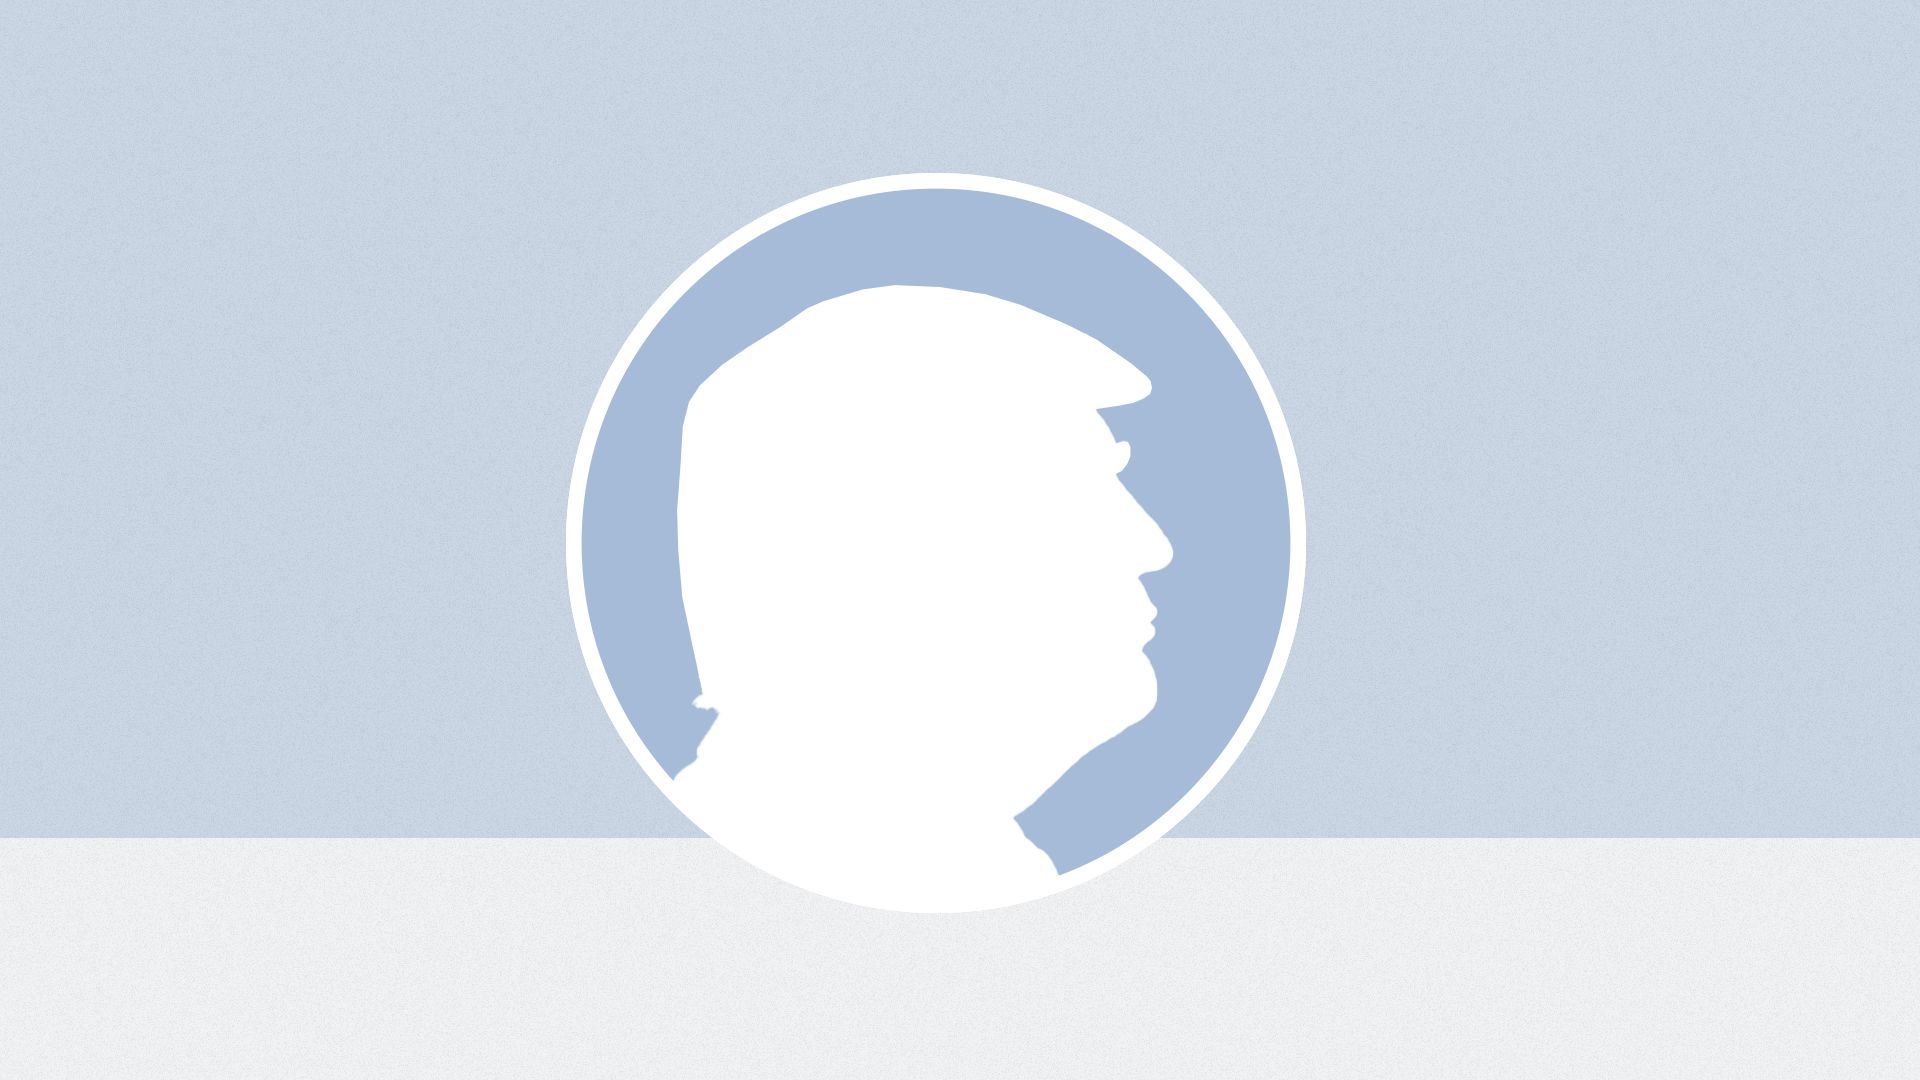 Illustration of Trump's silhouette inside a blank Facebook profile picture template